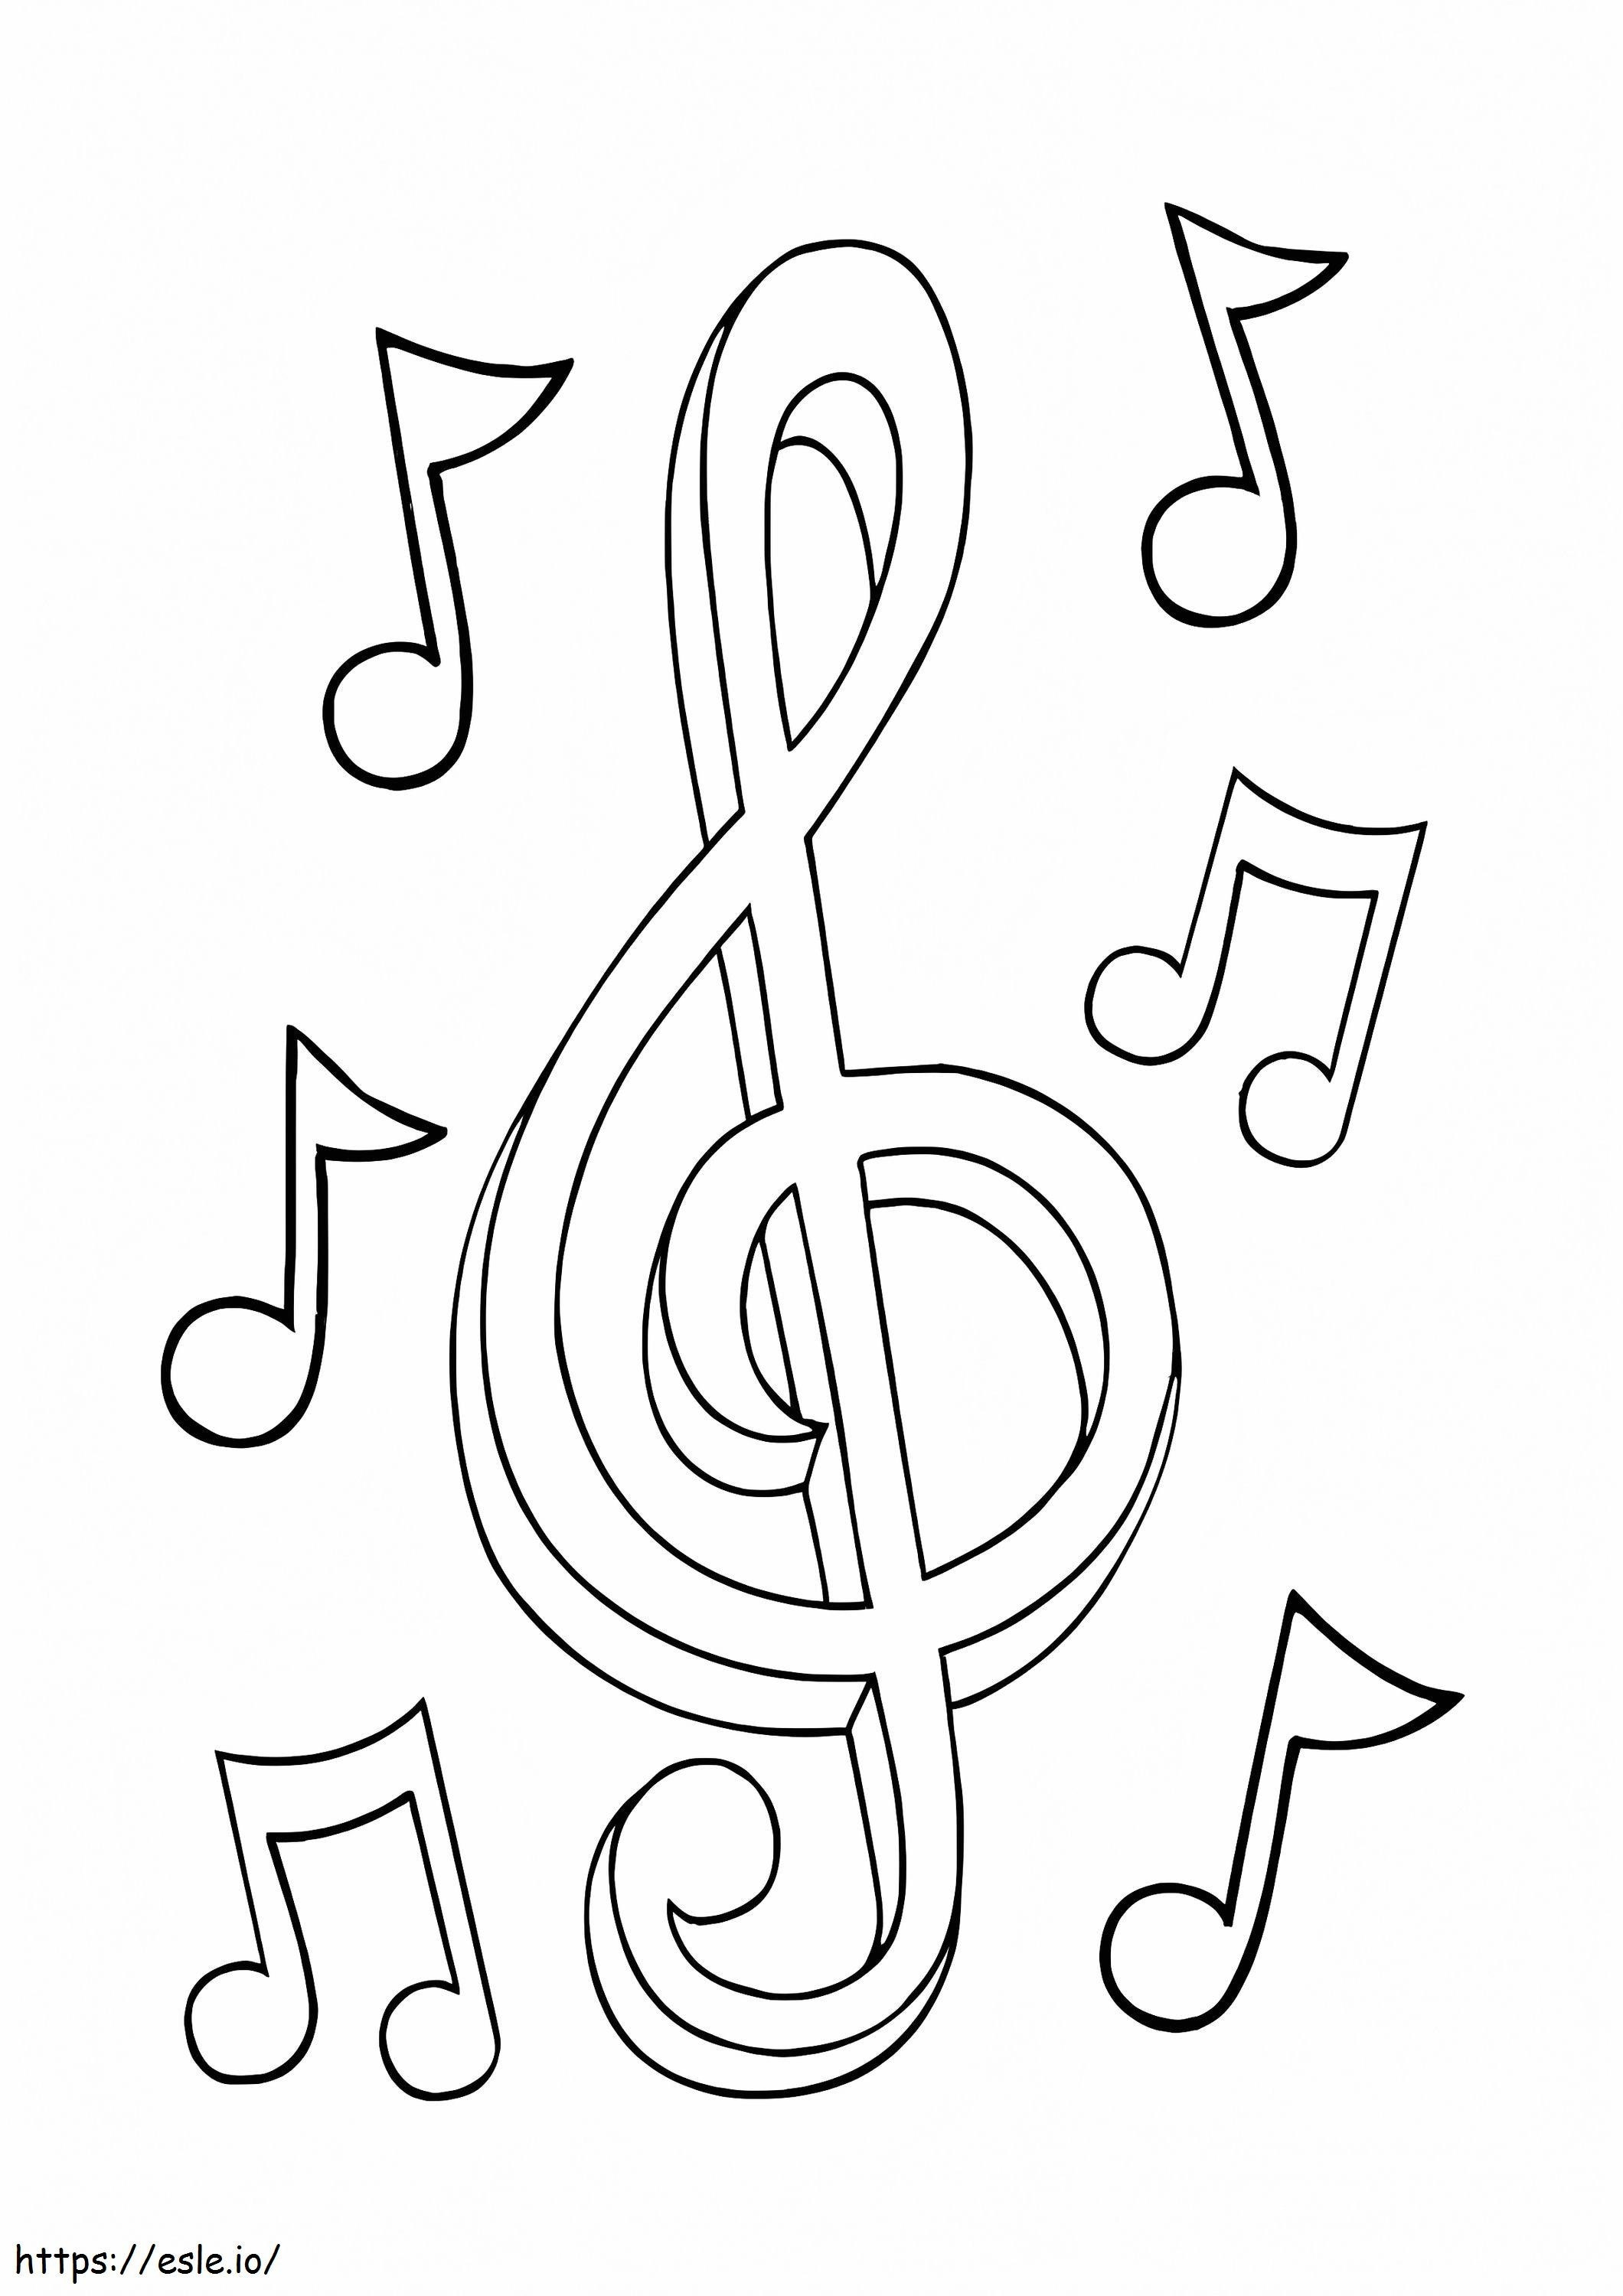 Normal Musical Note coloring page